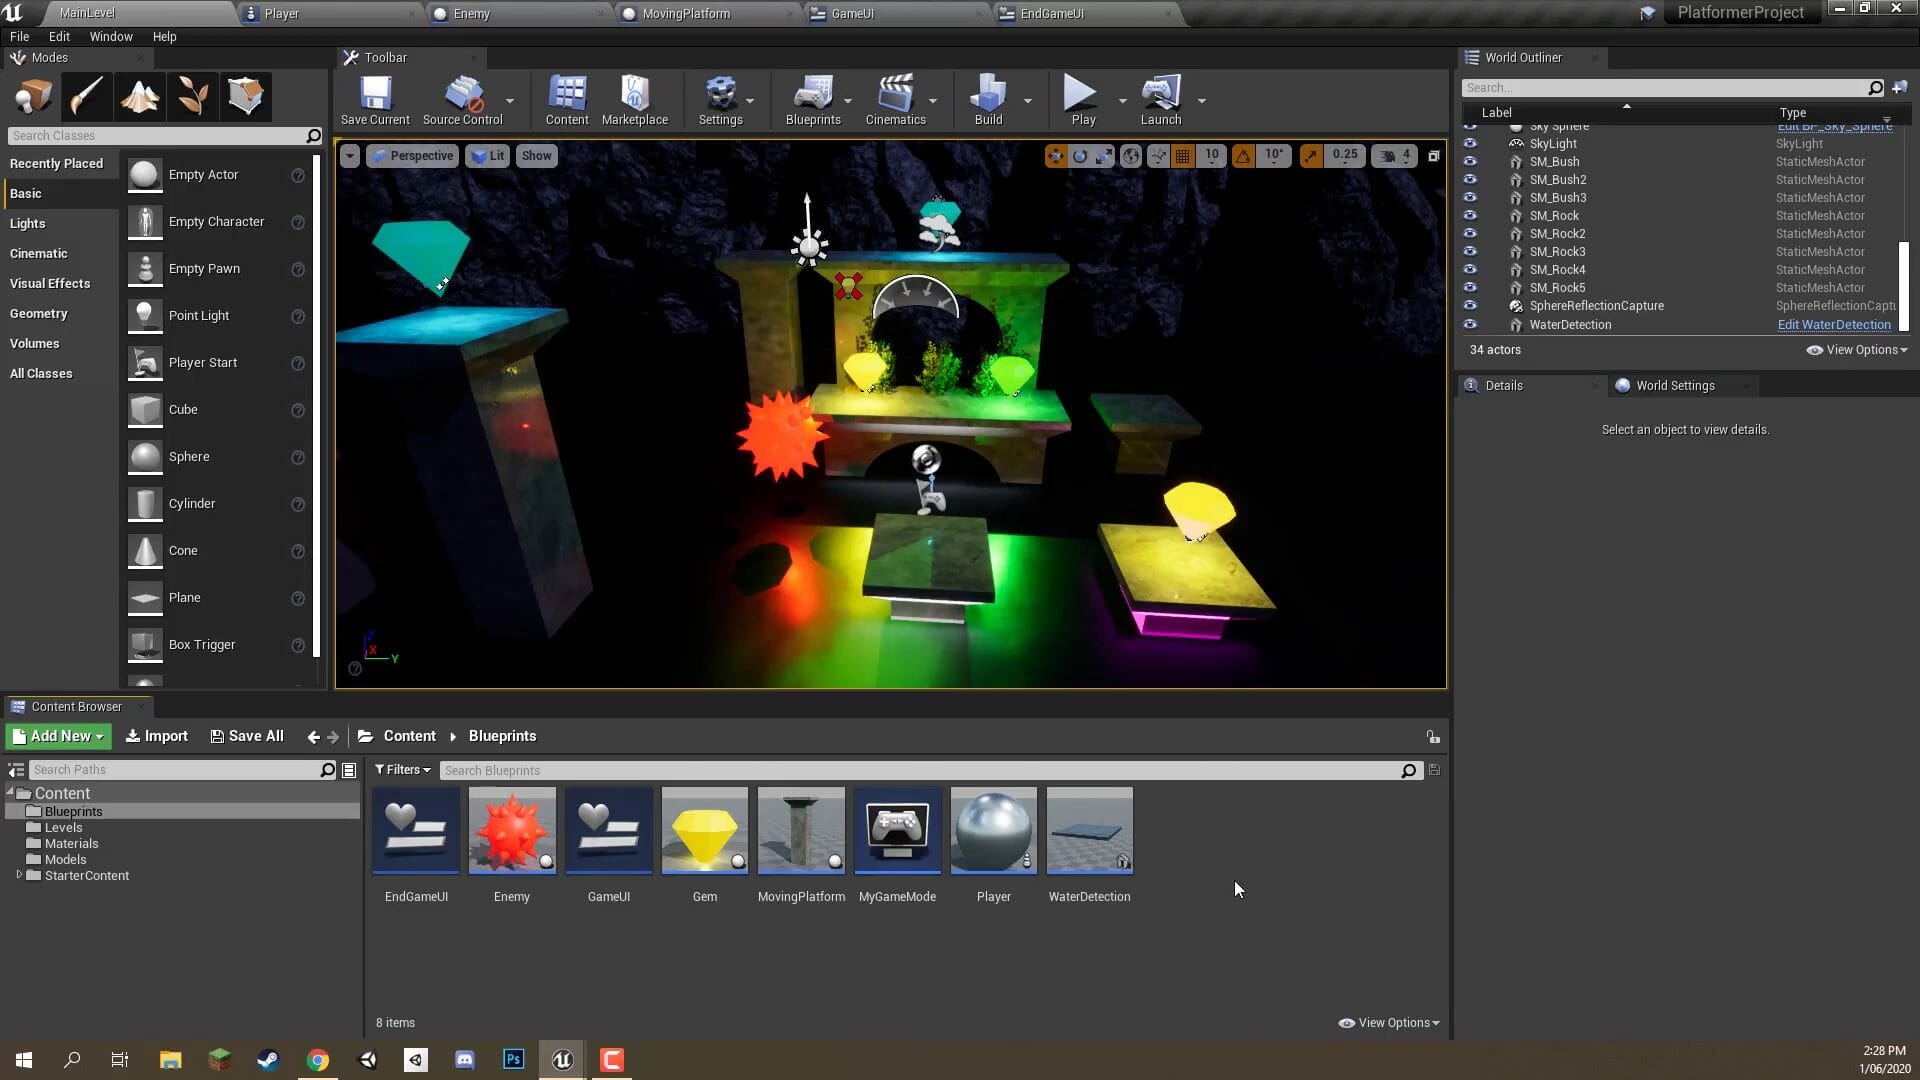 Creating a 3D game in the Unreal Engine.